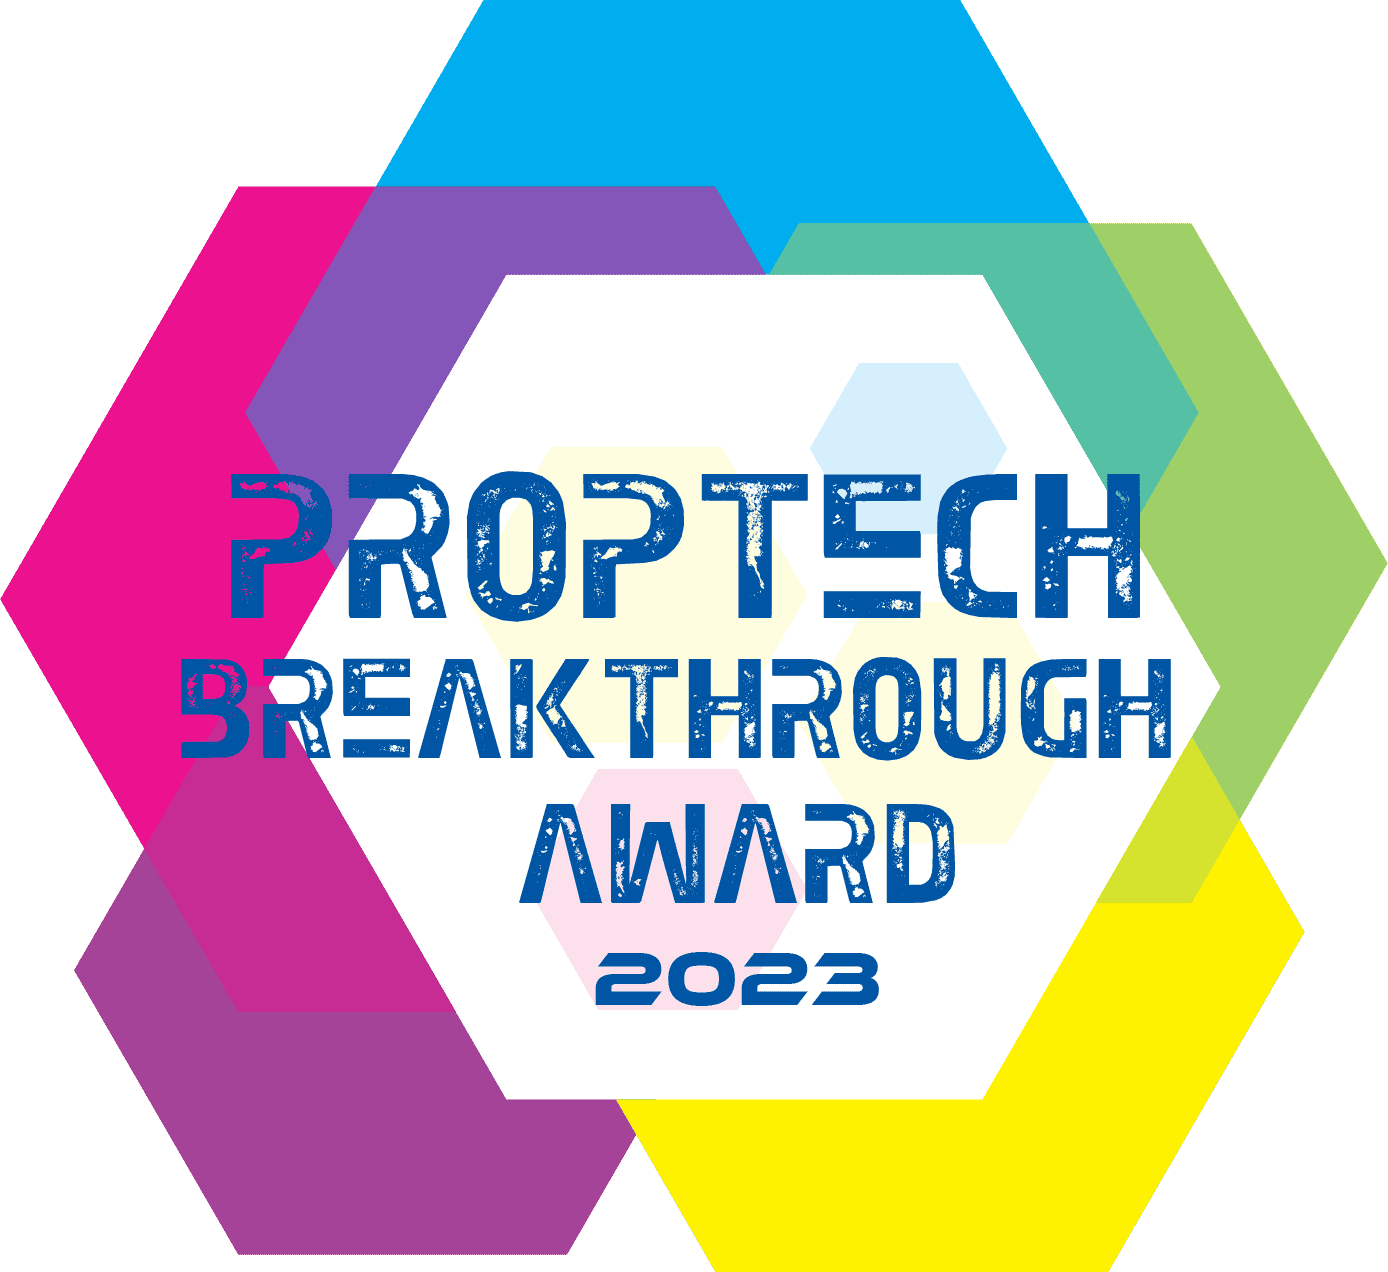 BH Named 2023 “Property Management Company of the Year” By PropTech